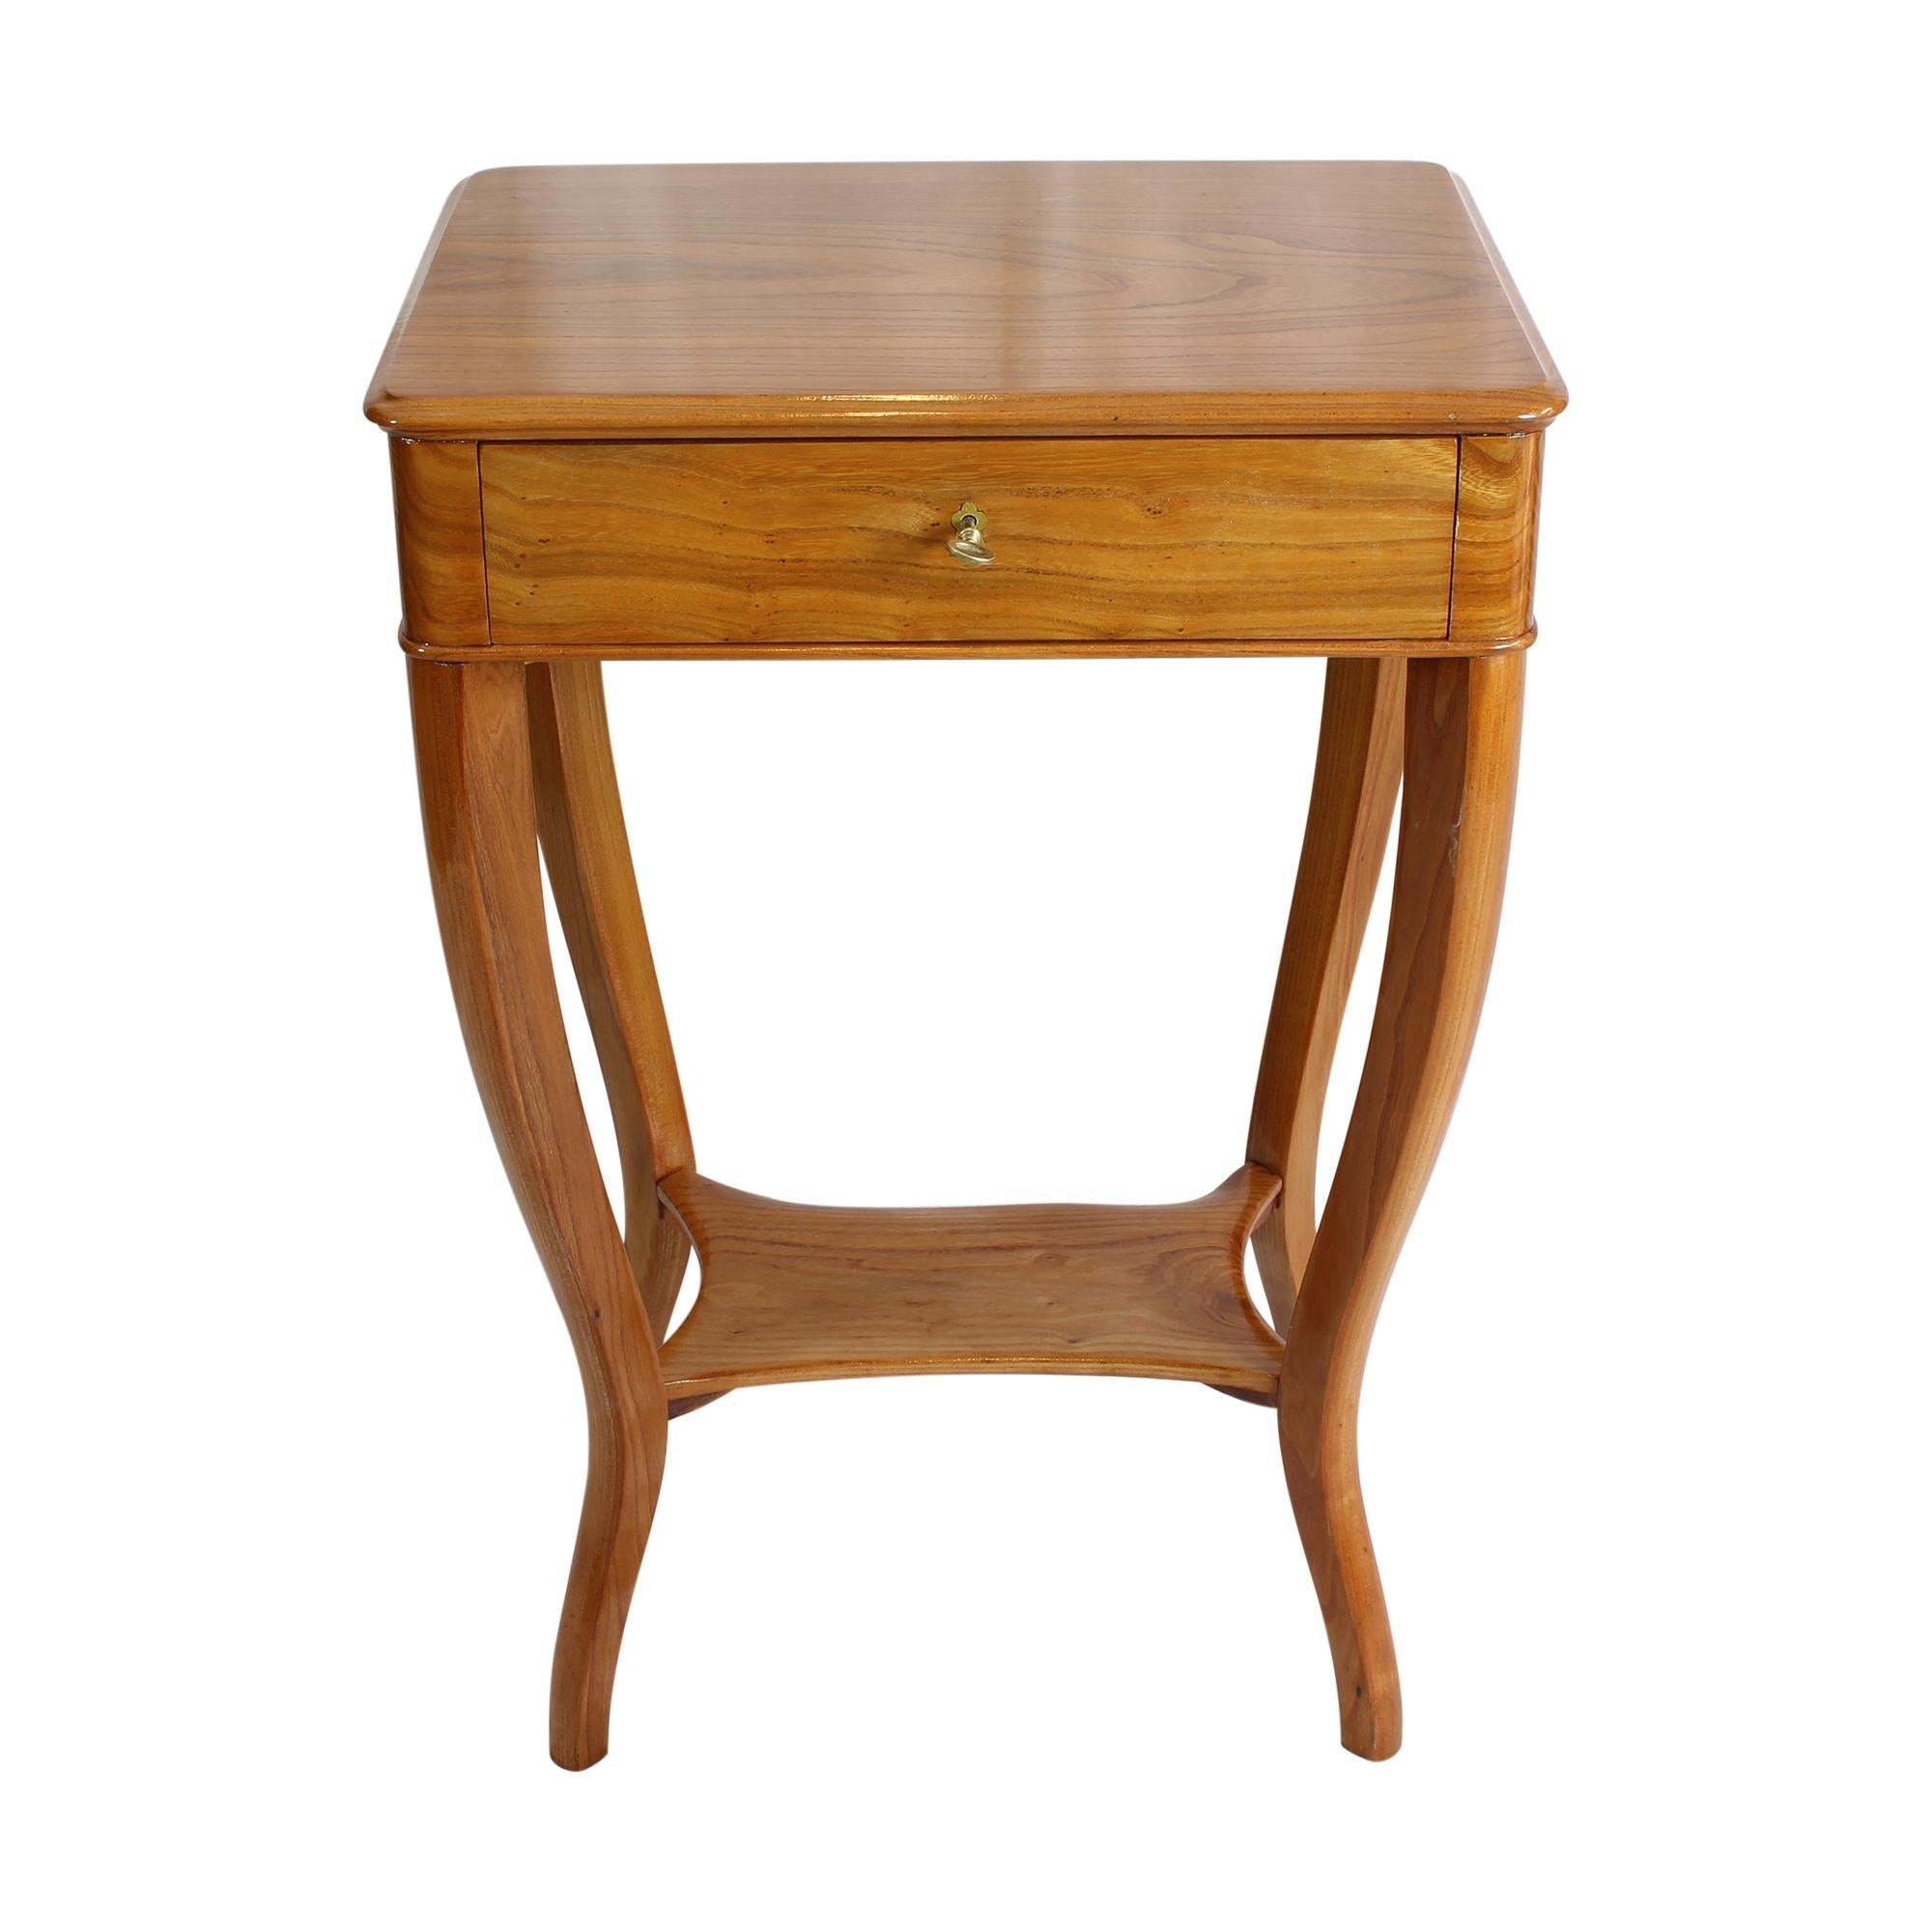 Beautiful sewing or side table made of elm wood the inner division is made of cherry wood. The table dates back to the time of Biedermeier period, more specifically from the time, around 1820. Very beautiful curved legs with a lockable drawer on